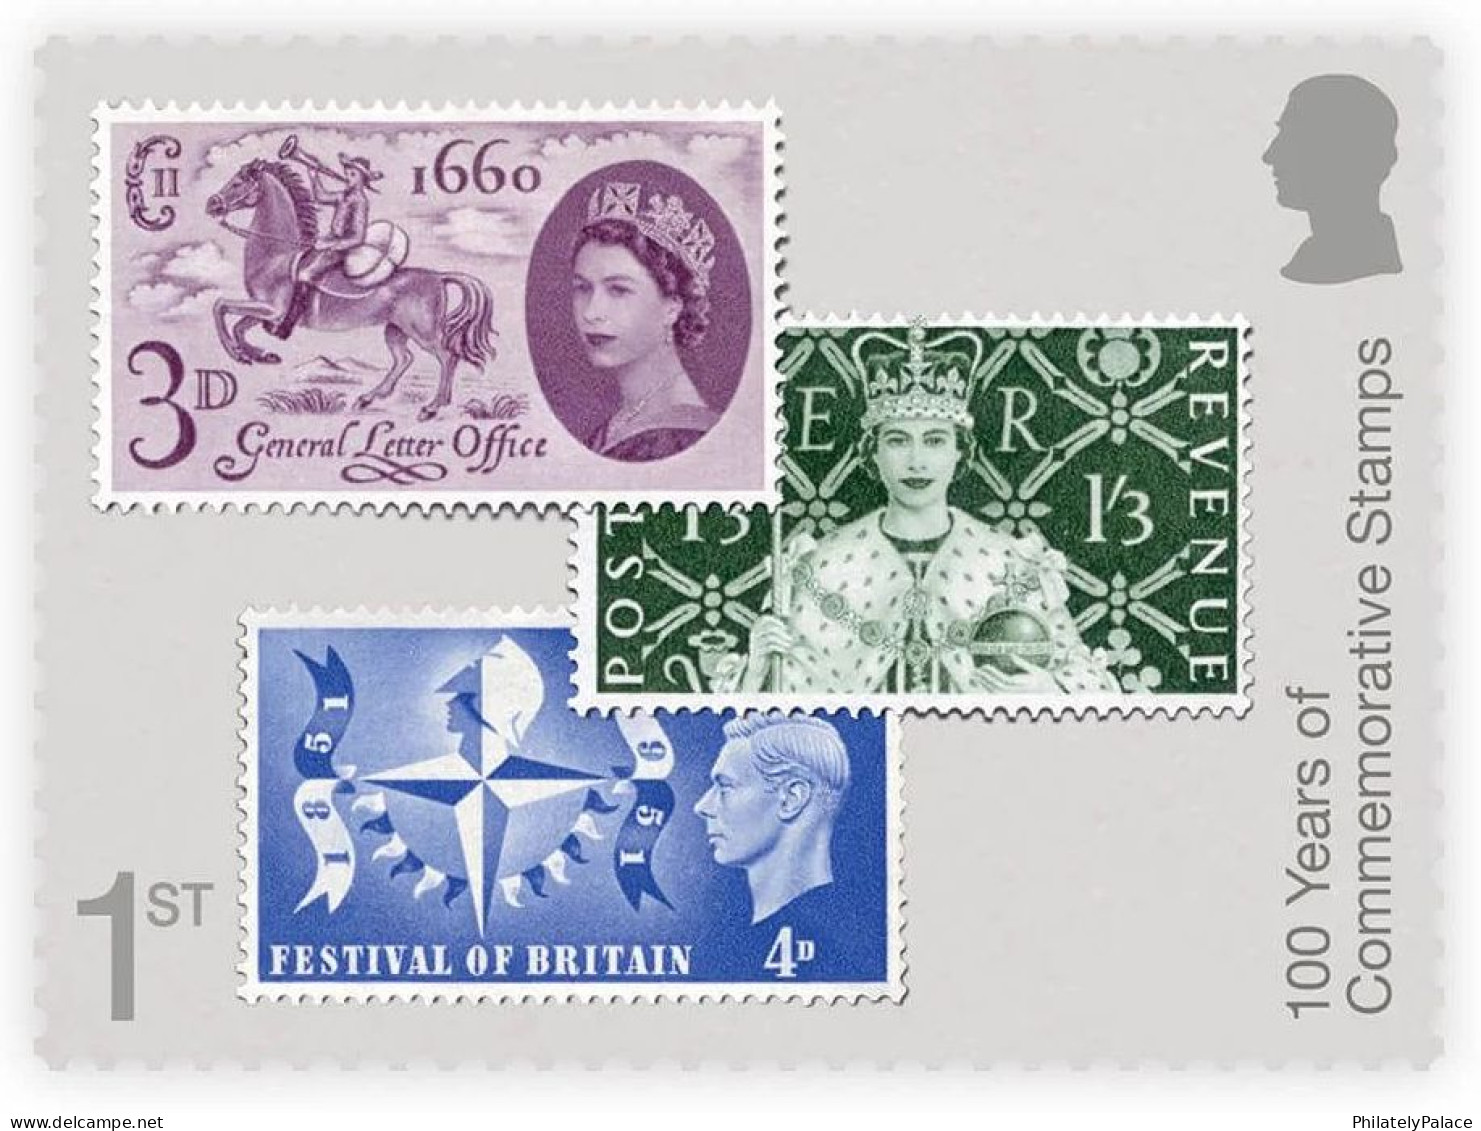 Great Britain (UK) New 2024 ,Stamp on Stamp, Lion,Queen,Butterfly,Flower,Music,Architecture, FDC Cover+ Brochure (**)